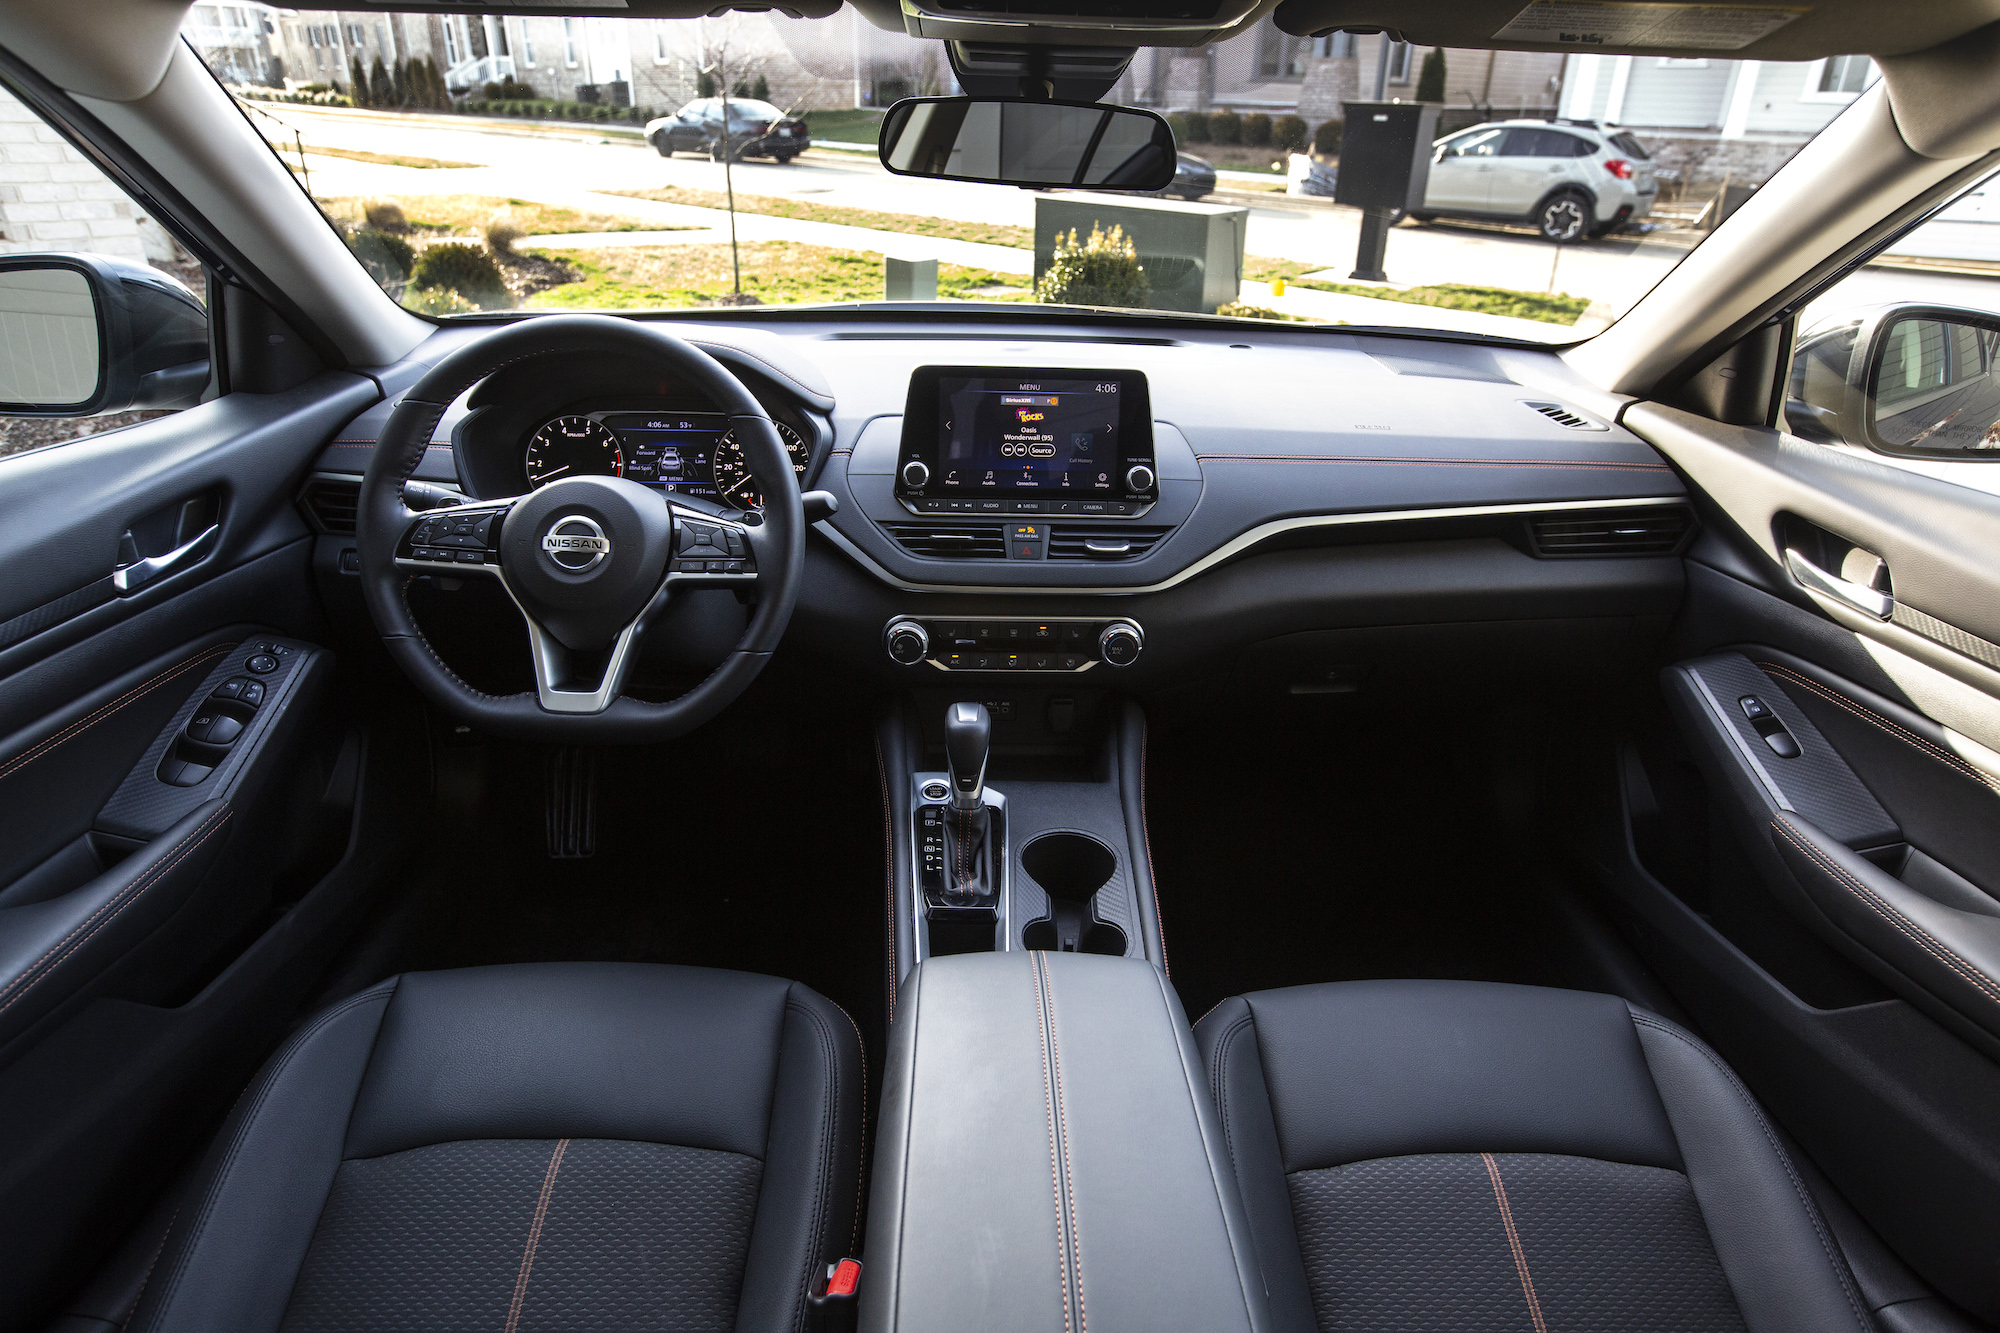 A 2021 Nissan Altima midsize sedan's front seats, center console, and dashboard